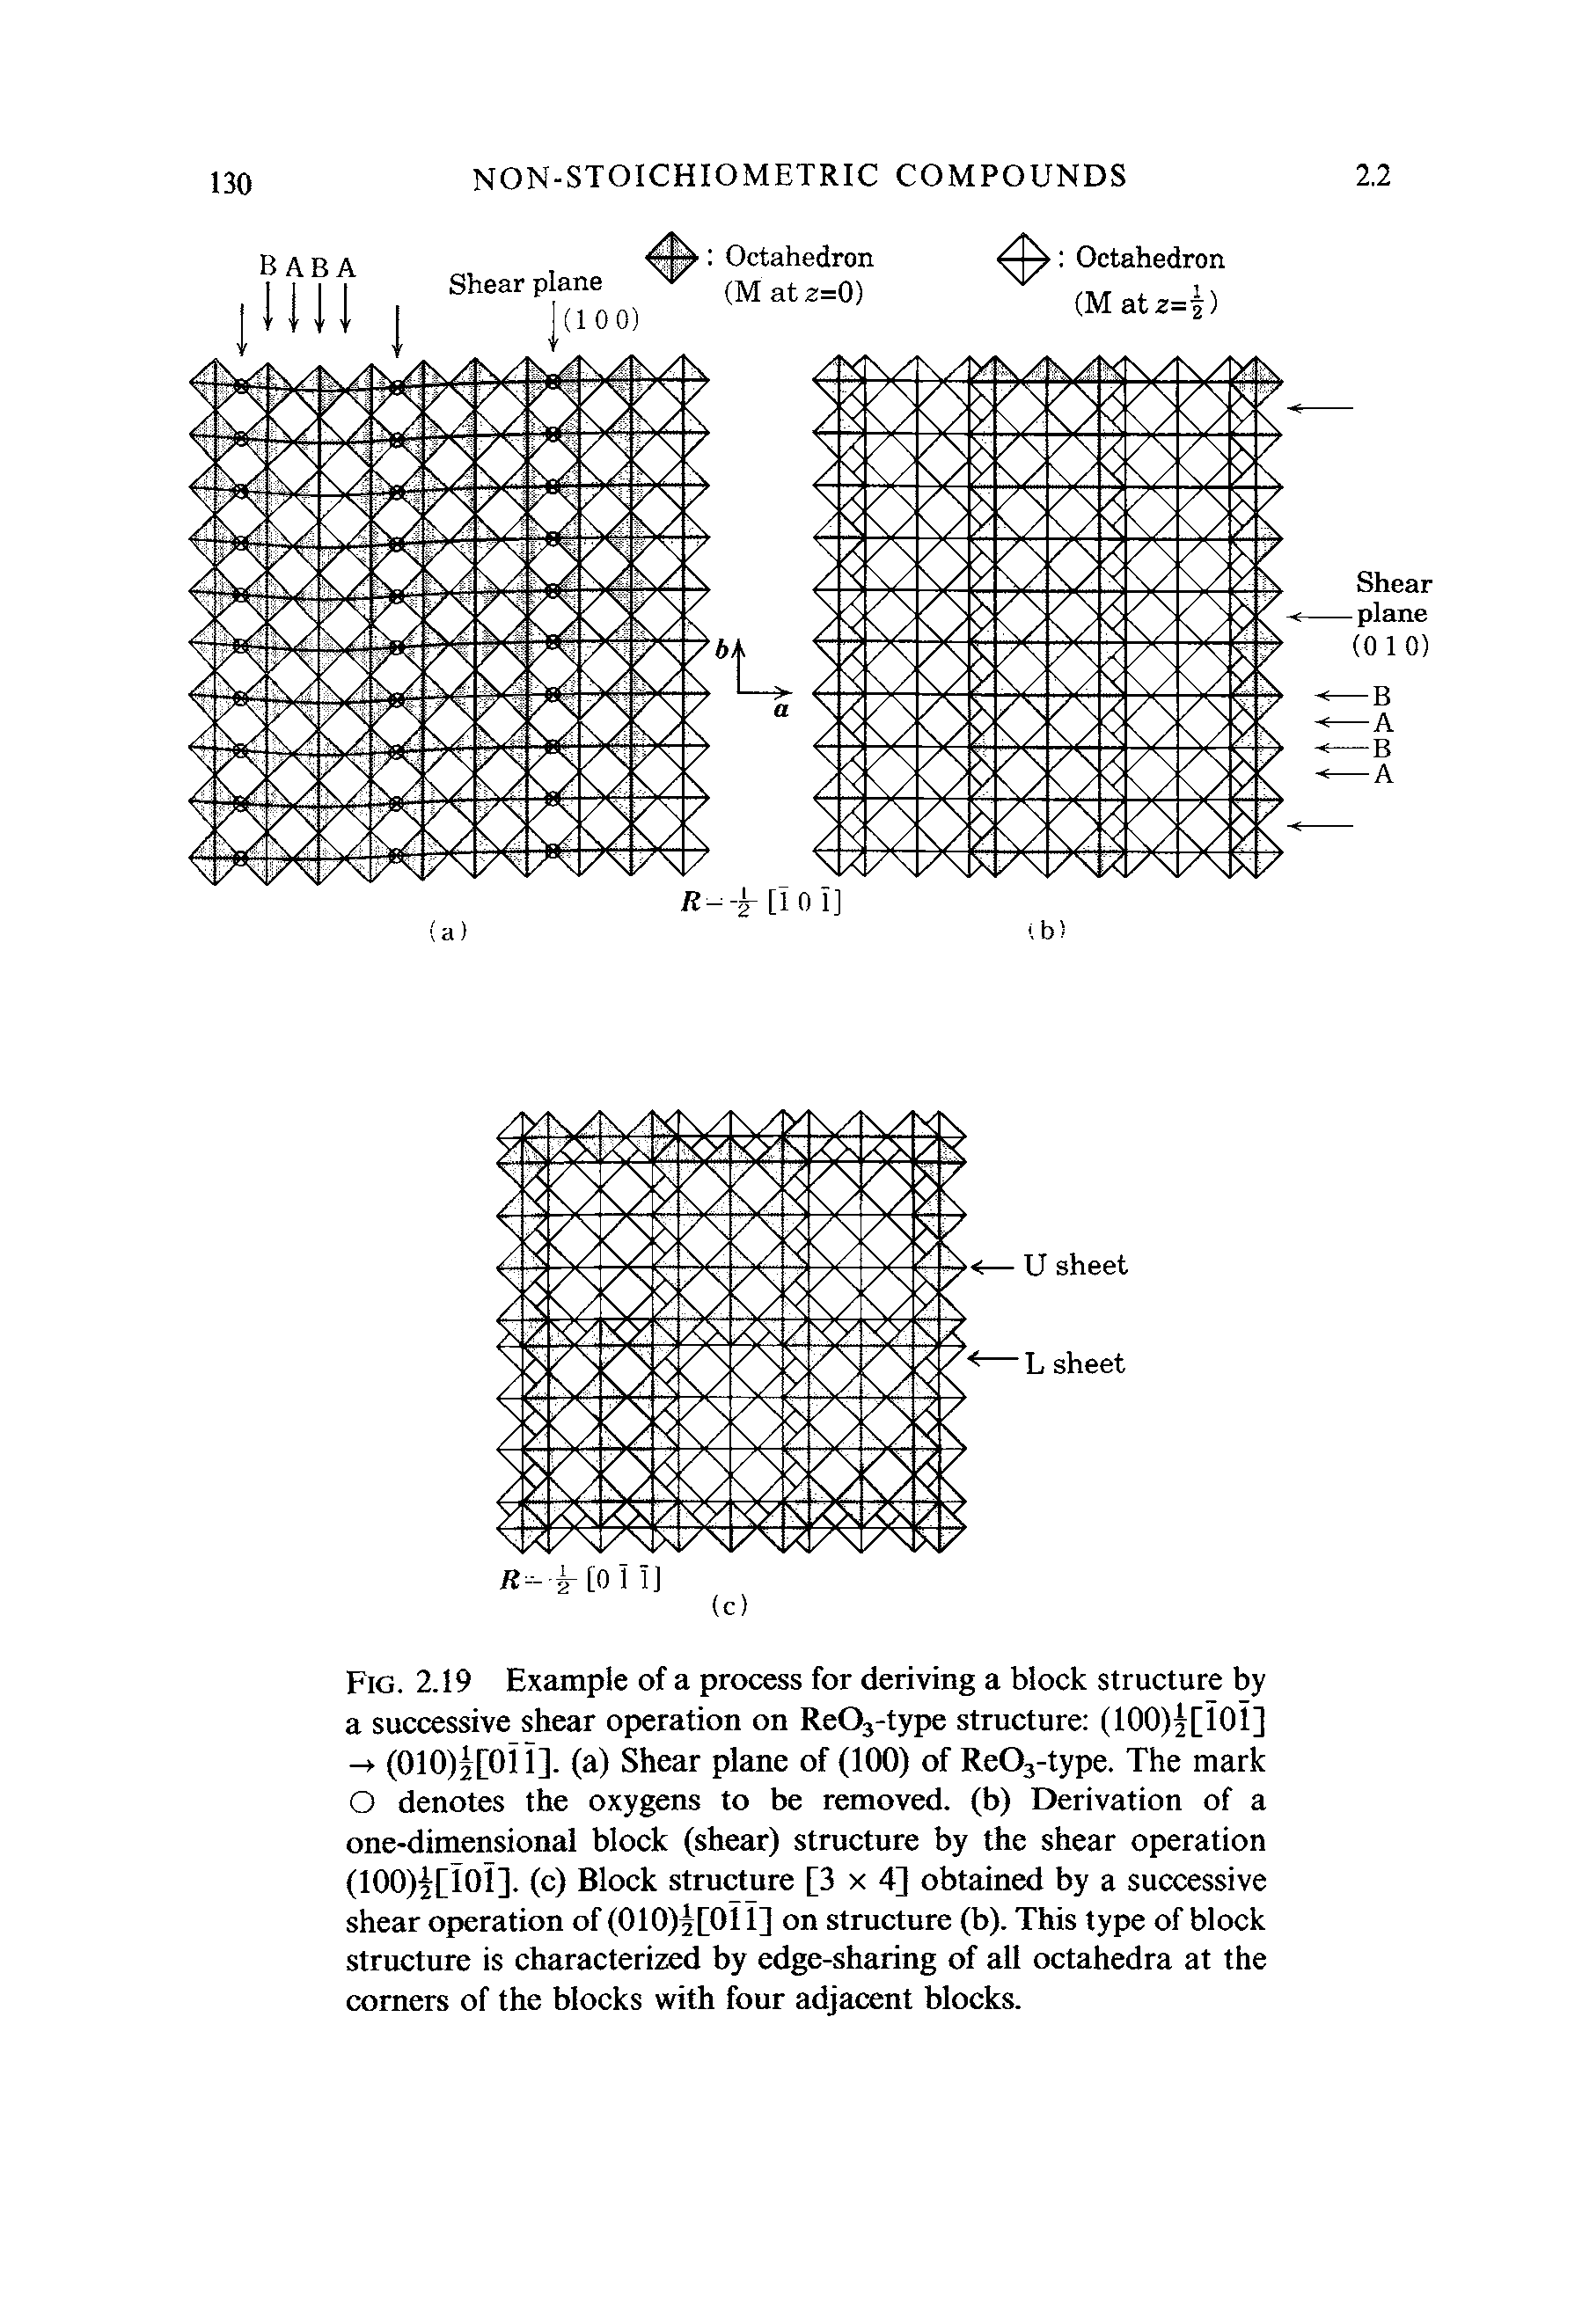 Fig. 2.19 Example of a process for deriving a block structure by a successive shear operation on ReOj-type structure (100)5[i0i] -> (010)5[0ii]. (a) Shear plane of (100) of ReOj-type. The mark O denotes the oxygens to be removed, (b) Derivation of a one-dimensional block (shear) structure by the shear operation (100)j[101]. (c) Block structure [3 x 4) obtained by a successive shear operation of (010)1(011] on structure (b). This type of block structure is characterized by edge-sharing of all octahedra at the corners of the blocks with four adjacent blocks.